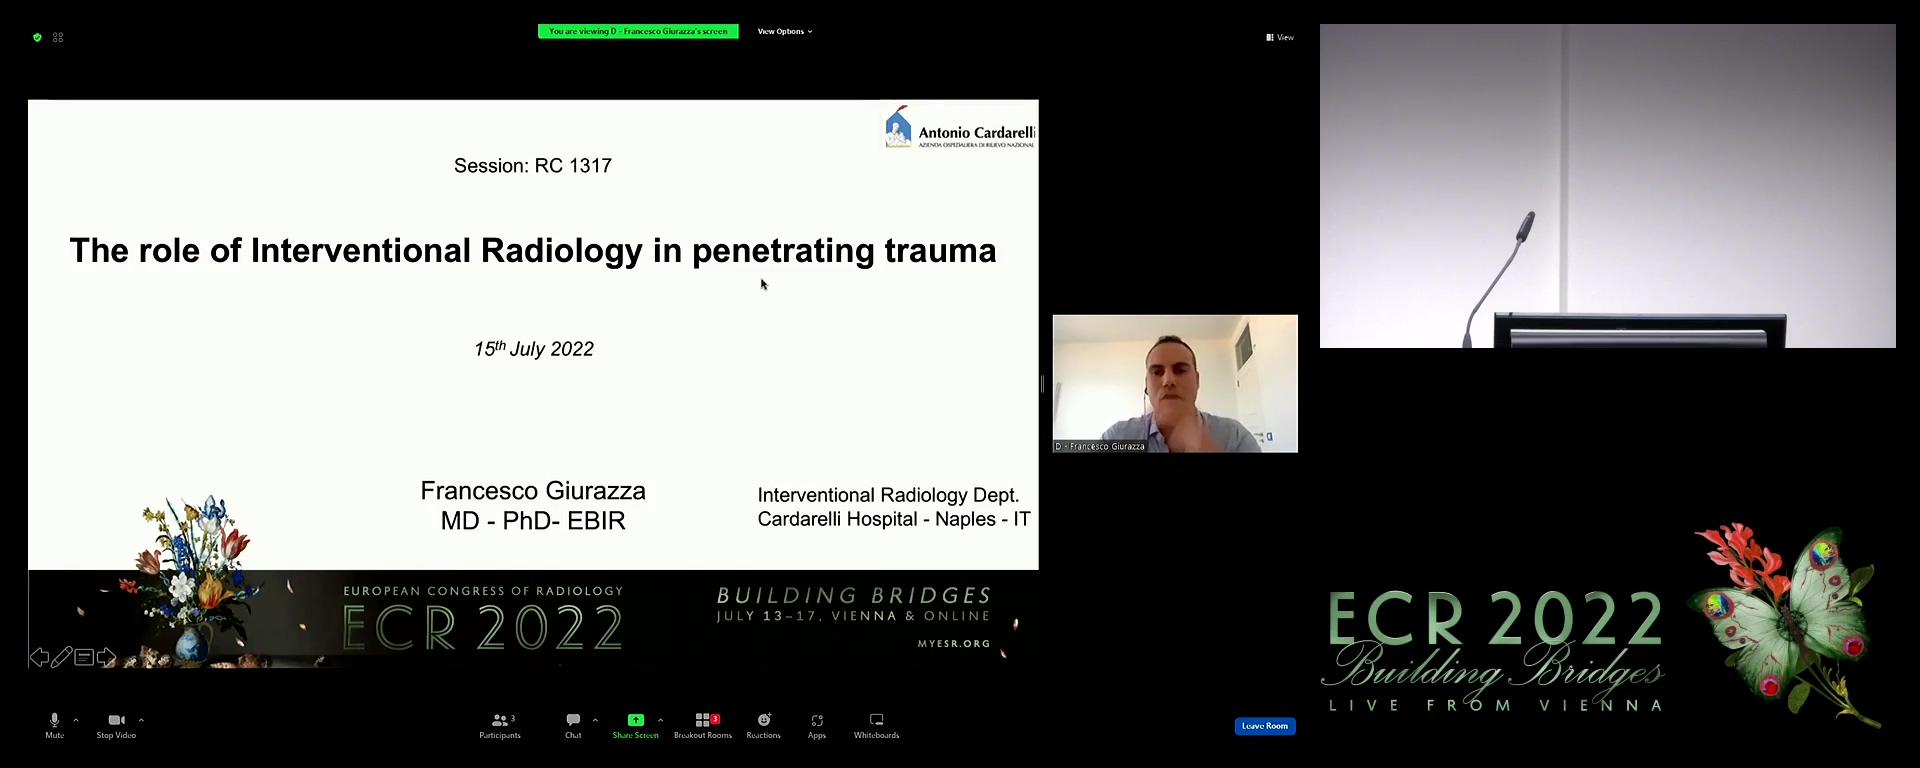 The role of interventional radiology in penetrating trauma